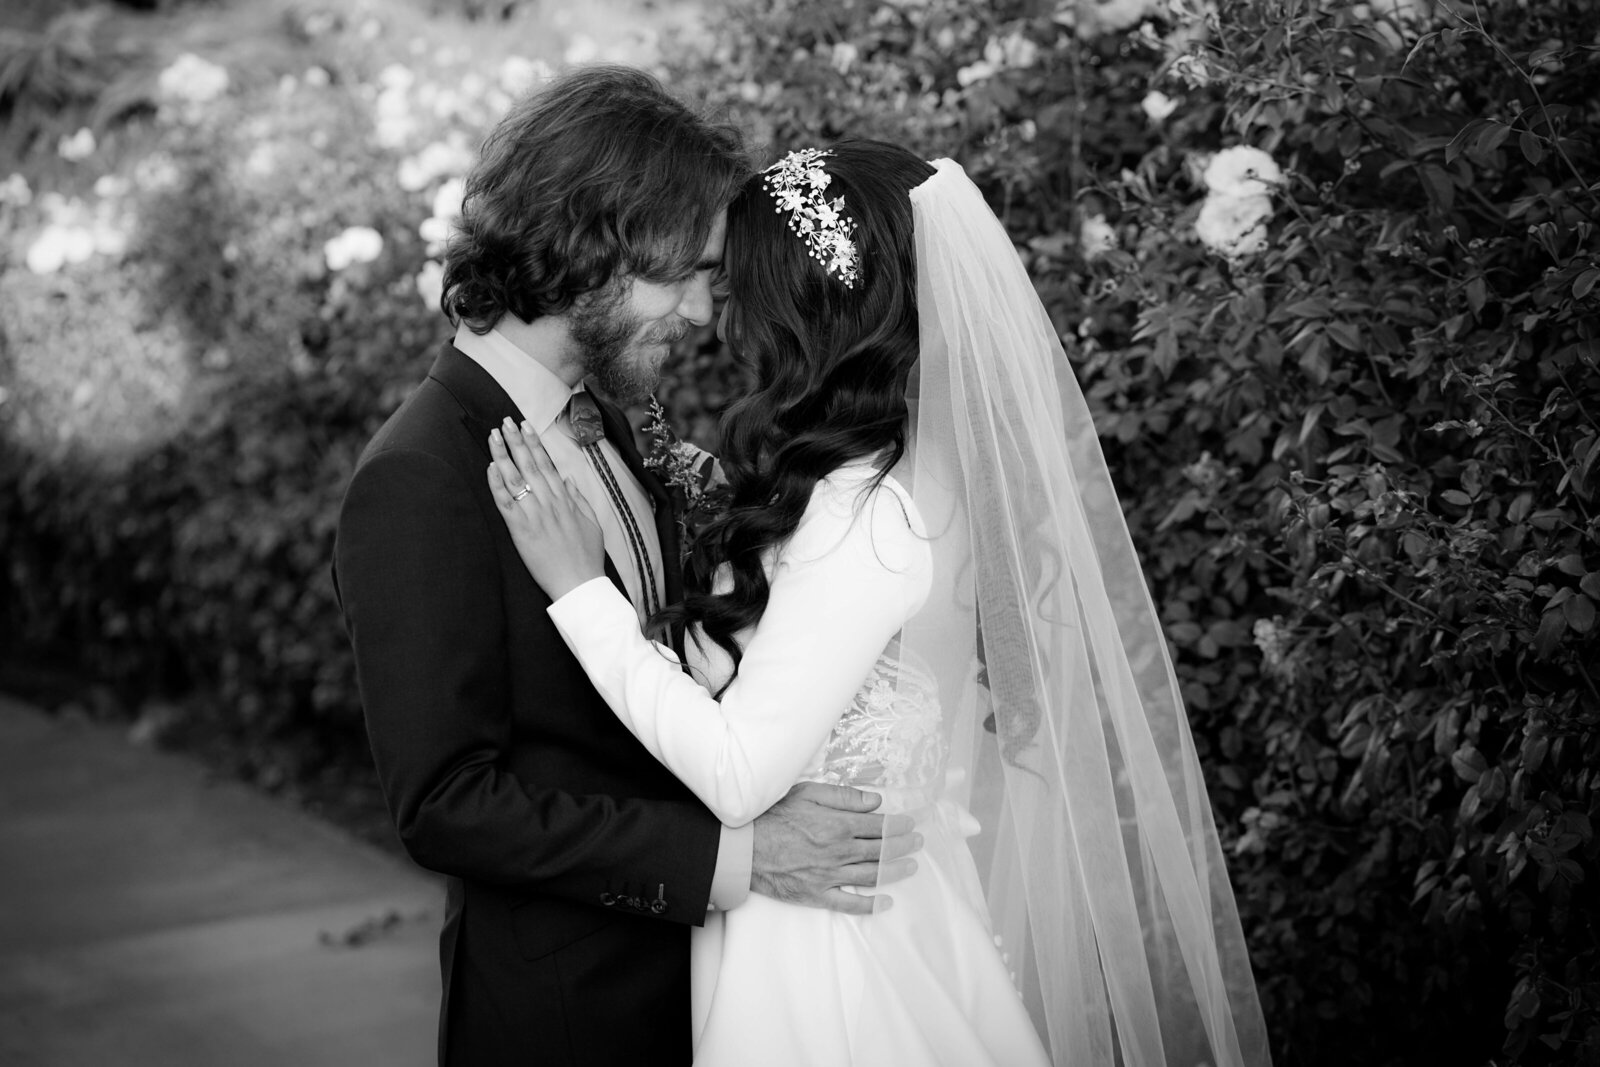 KS Gray Photography Newport Beach Bride and groom in front of bushes black and white photo